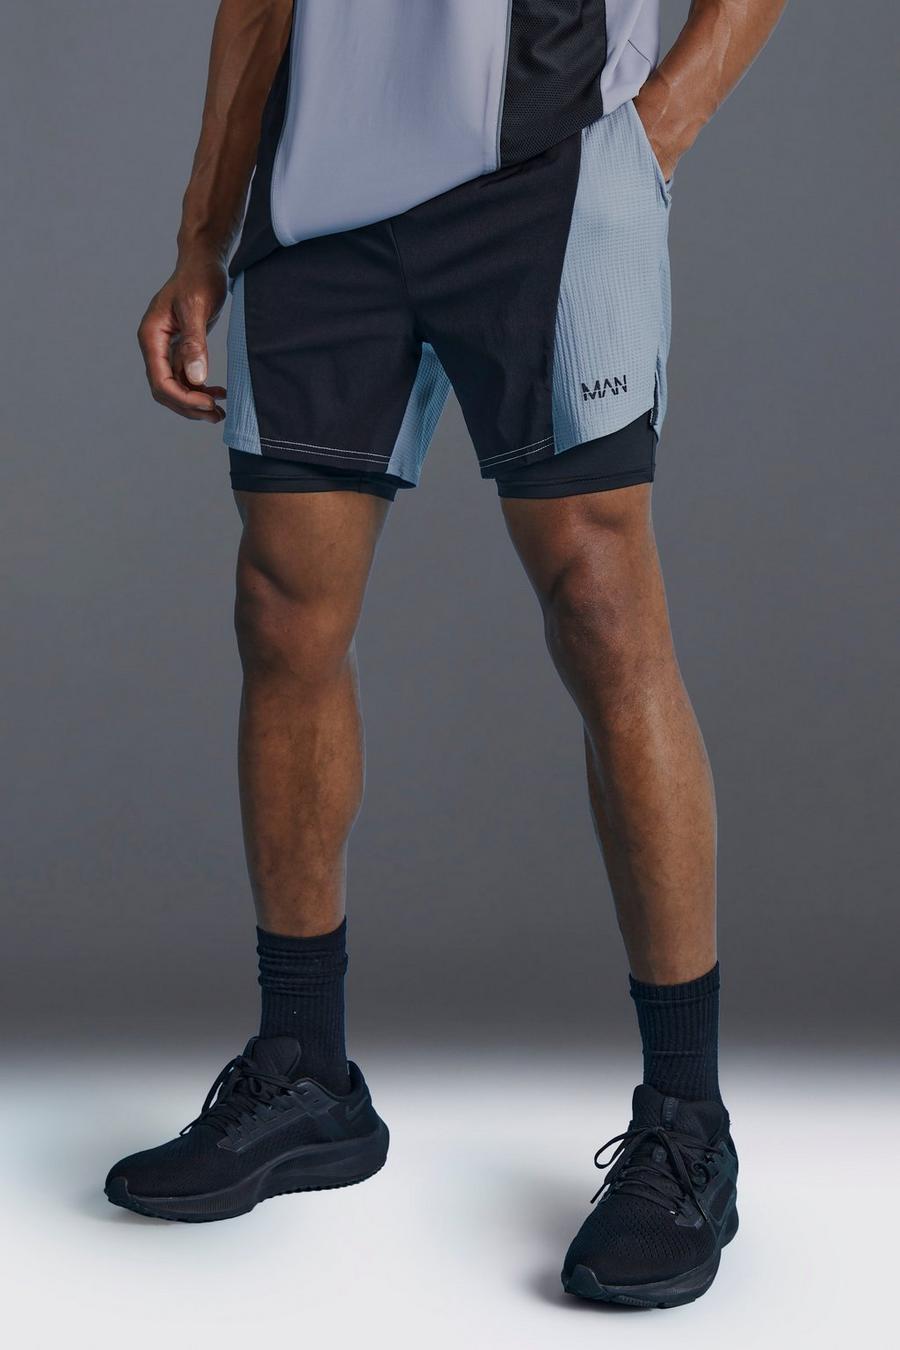 Man Active Colorblock 2-in-1 Shorts, Charcoal image number 1